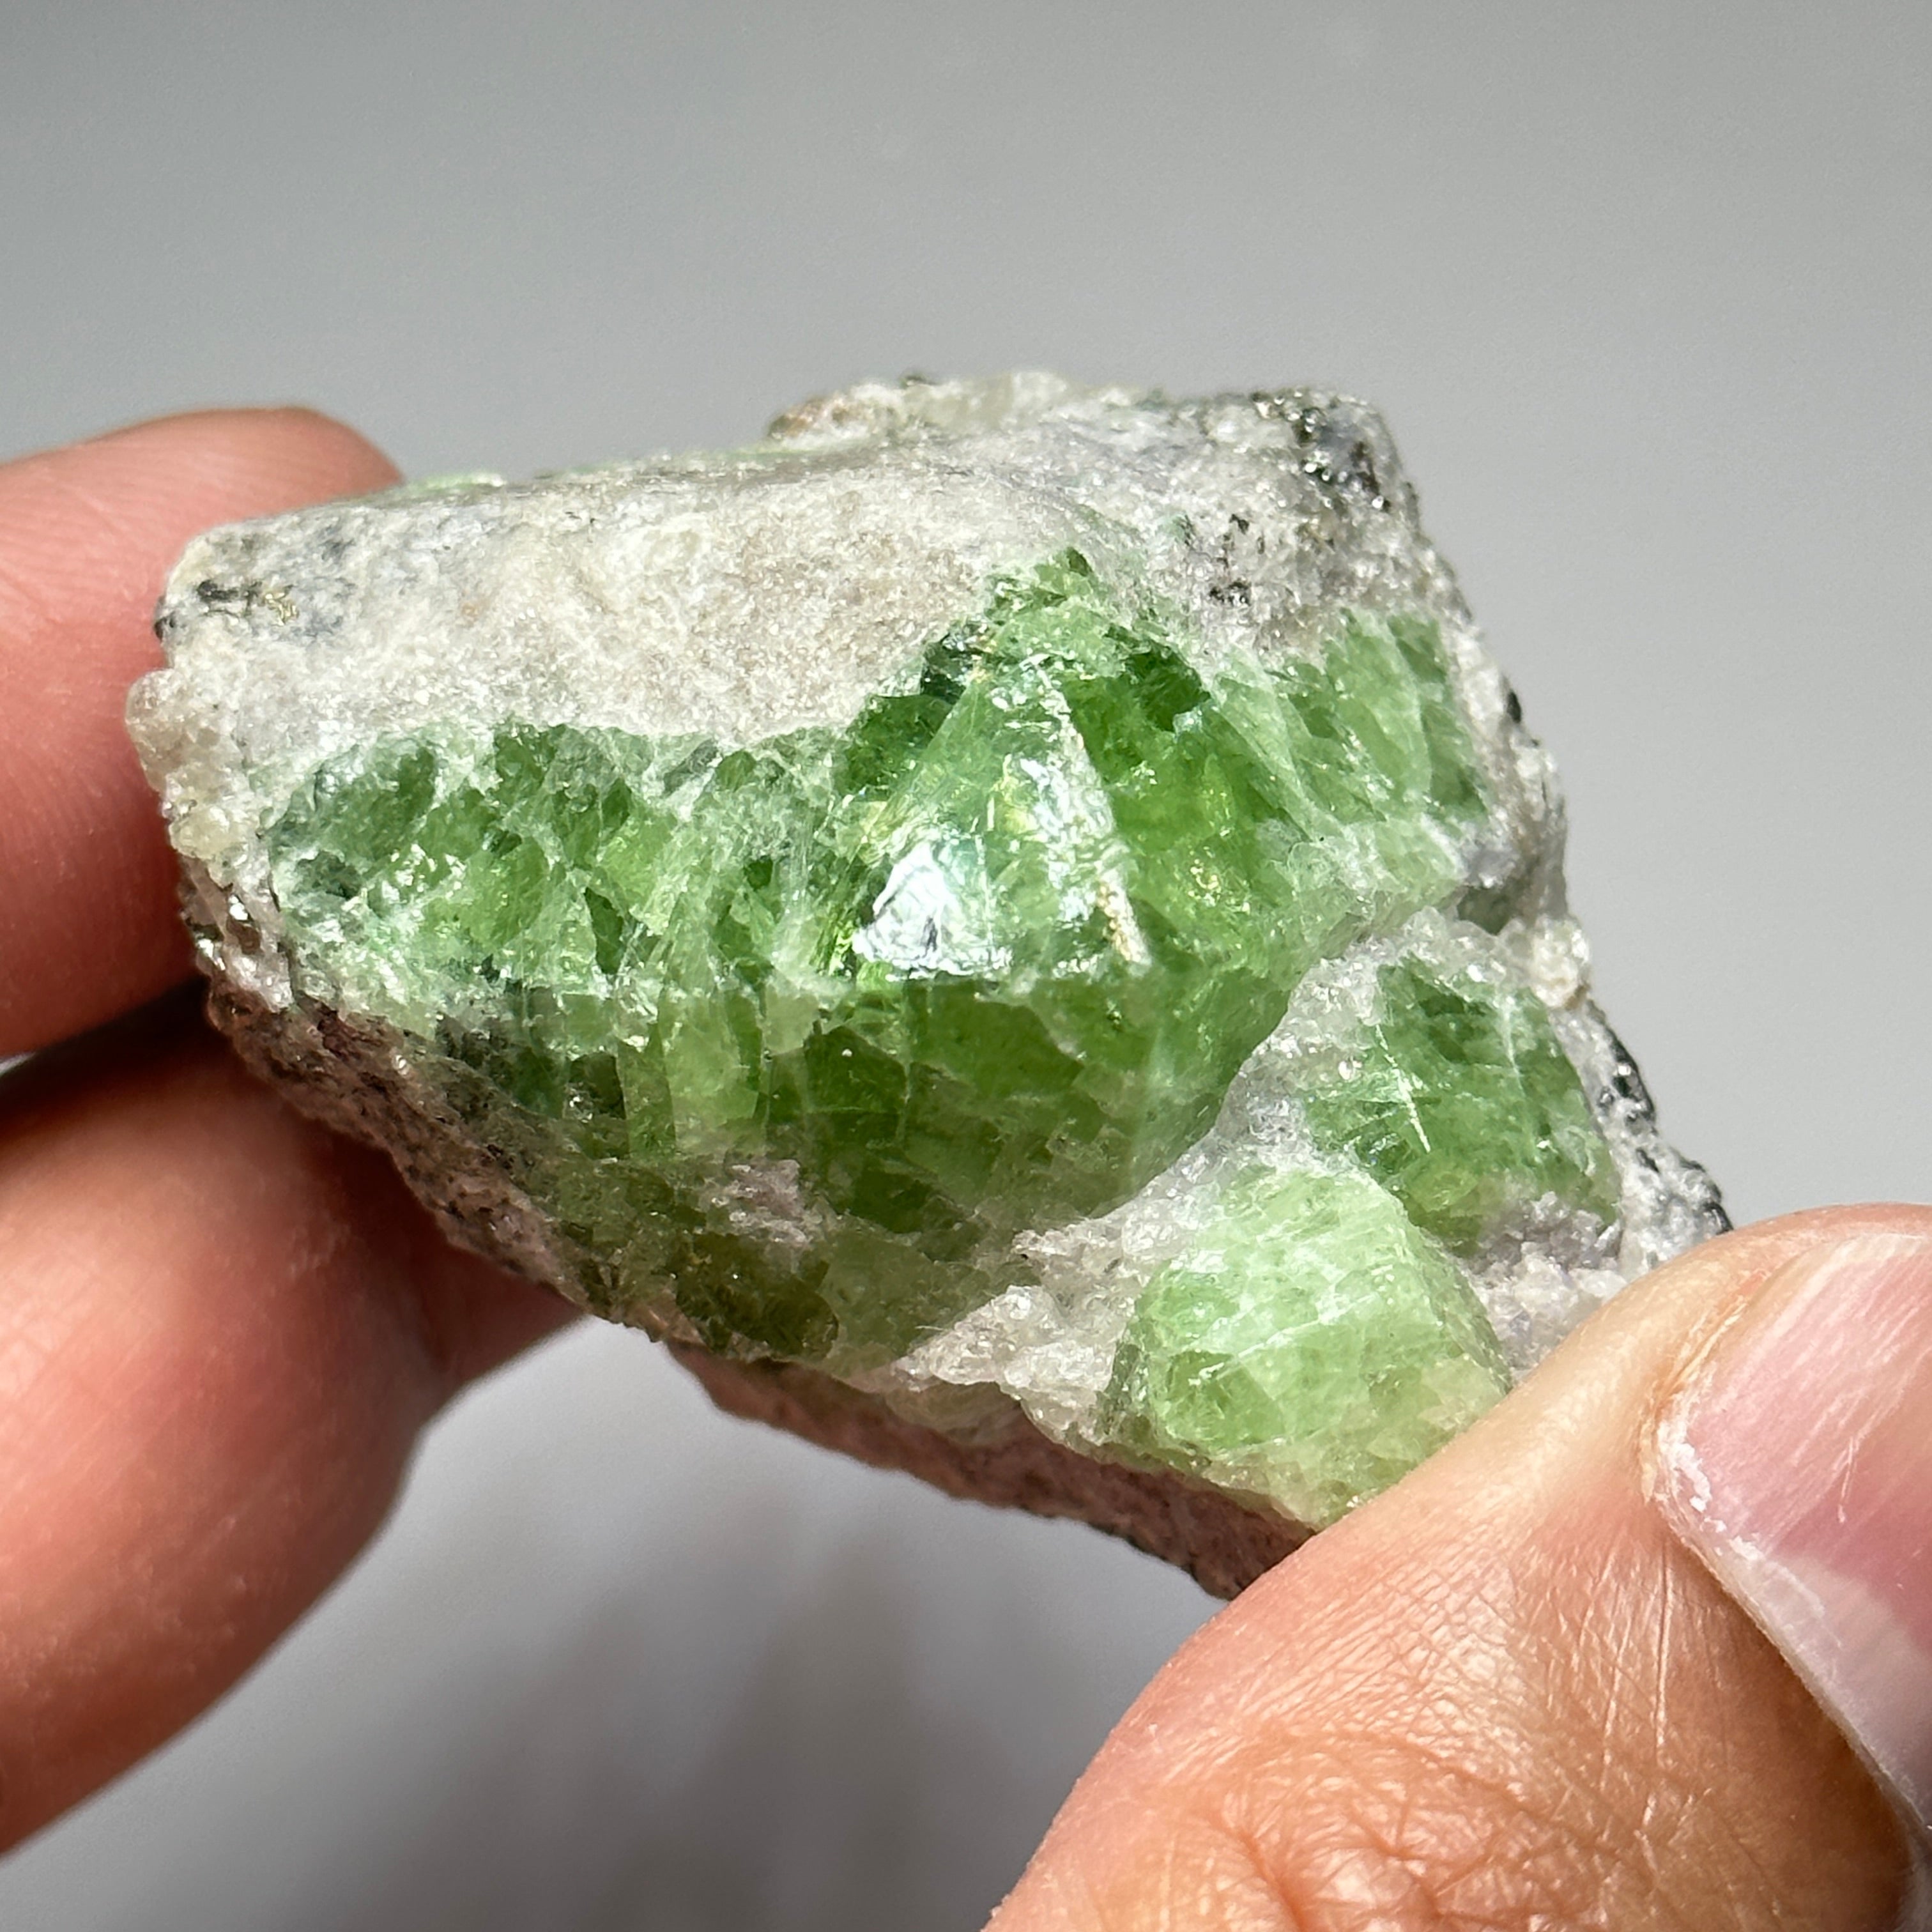 84.30gm / 421.50ct Tsavorite Crystal With Tanzanite And Pyrite on Matrix, Merelani, Tanzania. 47 x 36 x 39mm Gem portions and sharp point on crystals